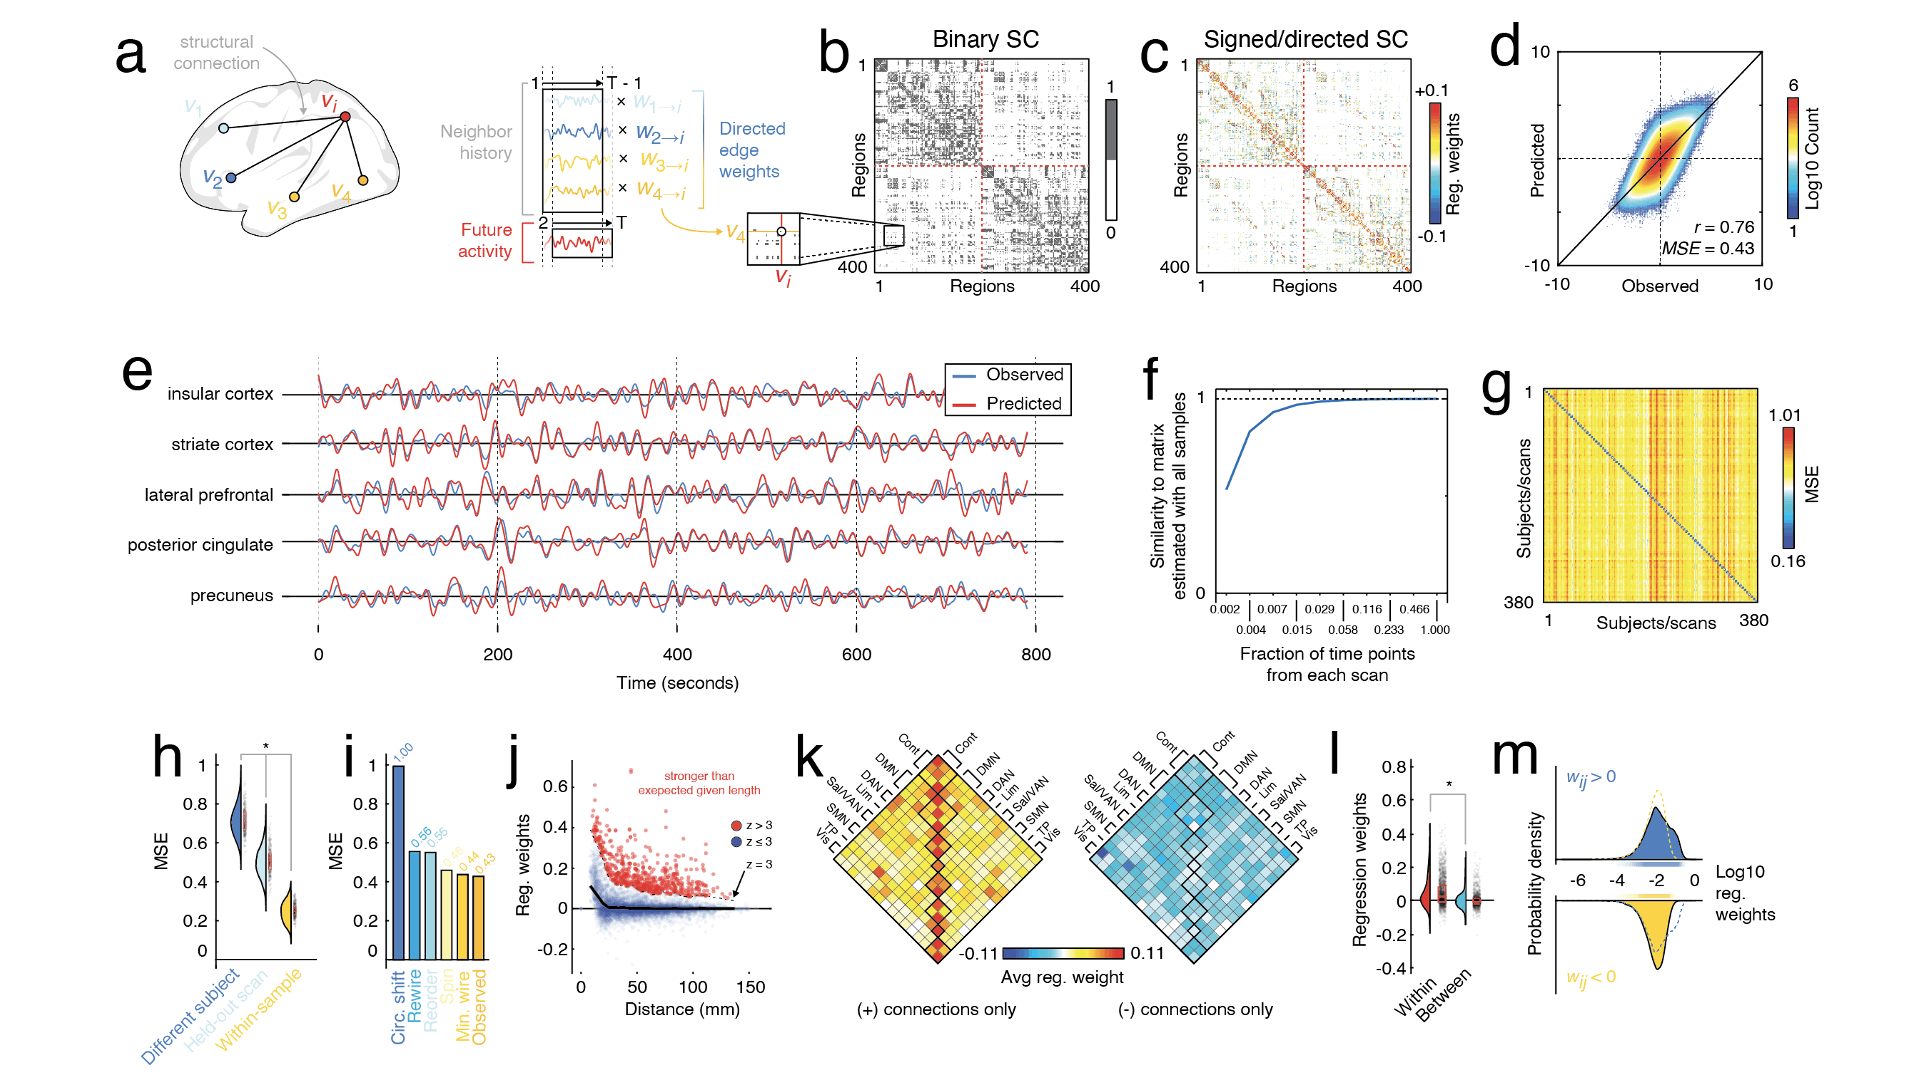 Redefining the connectome - a multi-modal, asymmetric, weighted, and signed description of anatomical connectivity